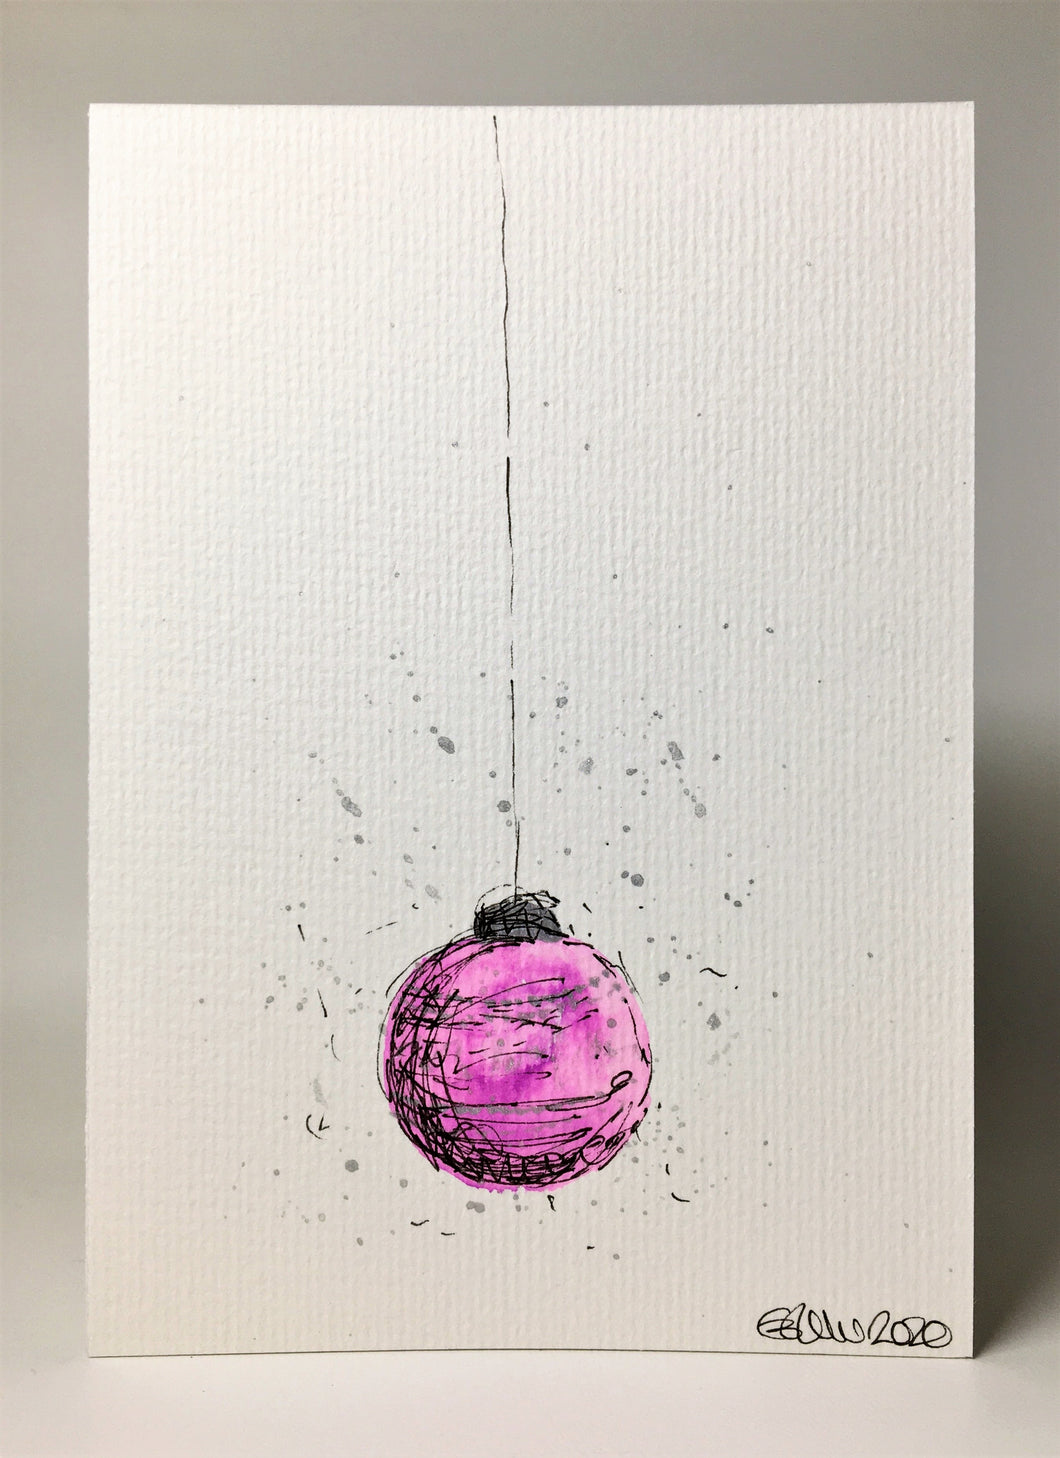 Original Hand Painted Christmas Card - Bauble Collection - Pink and Silver Bauble - eDgE dEsiGn London